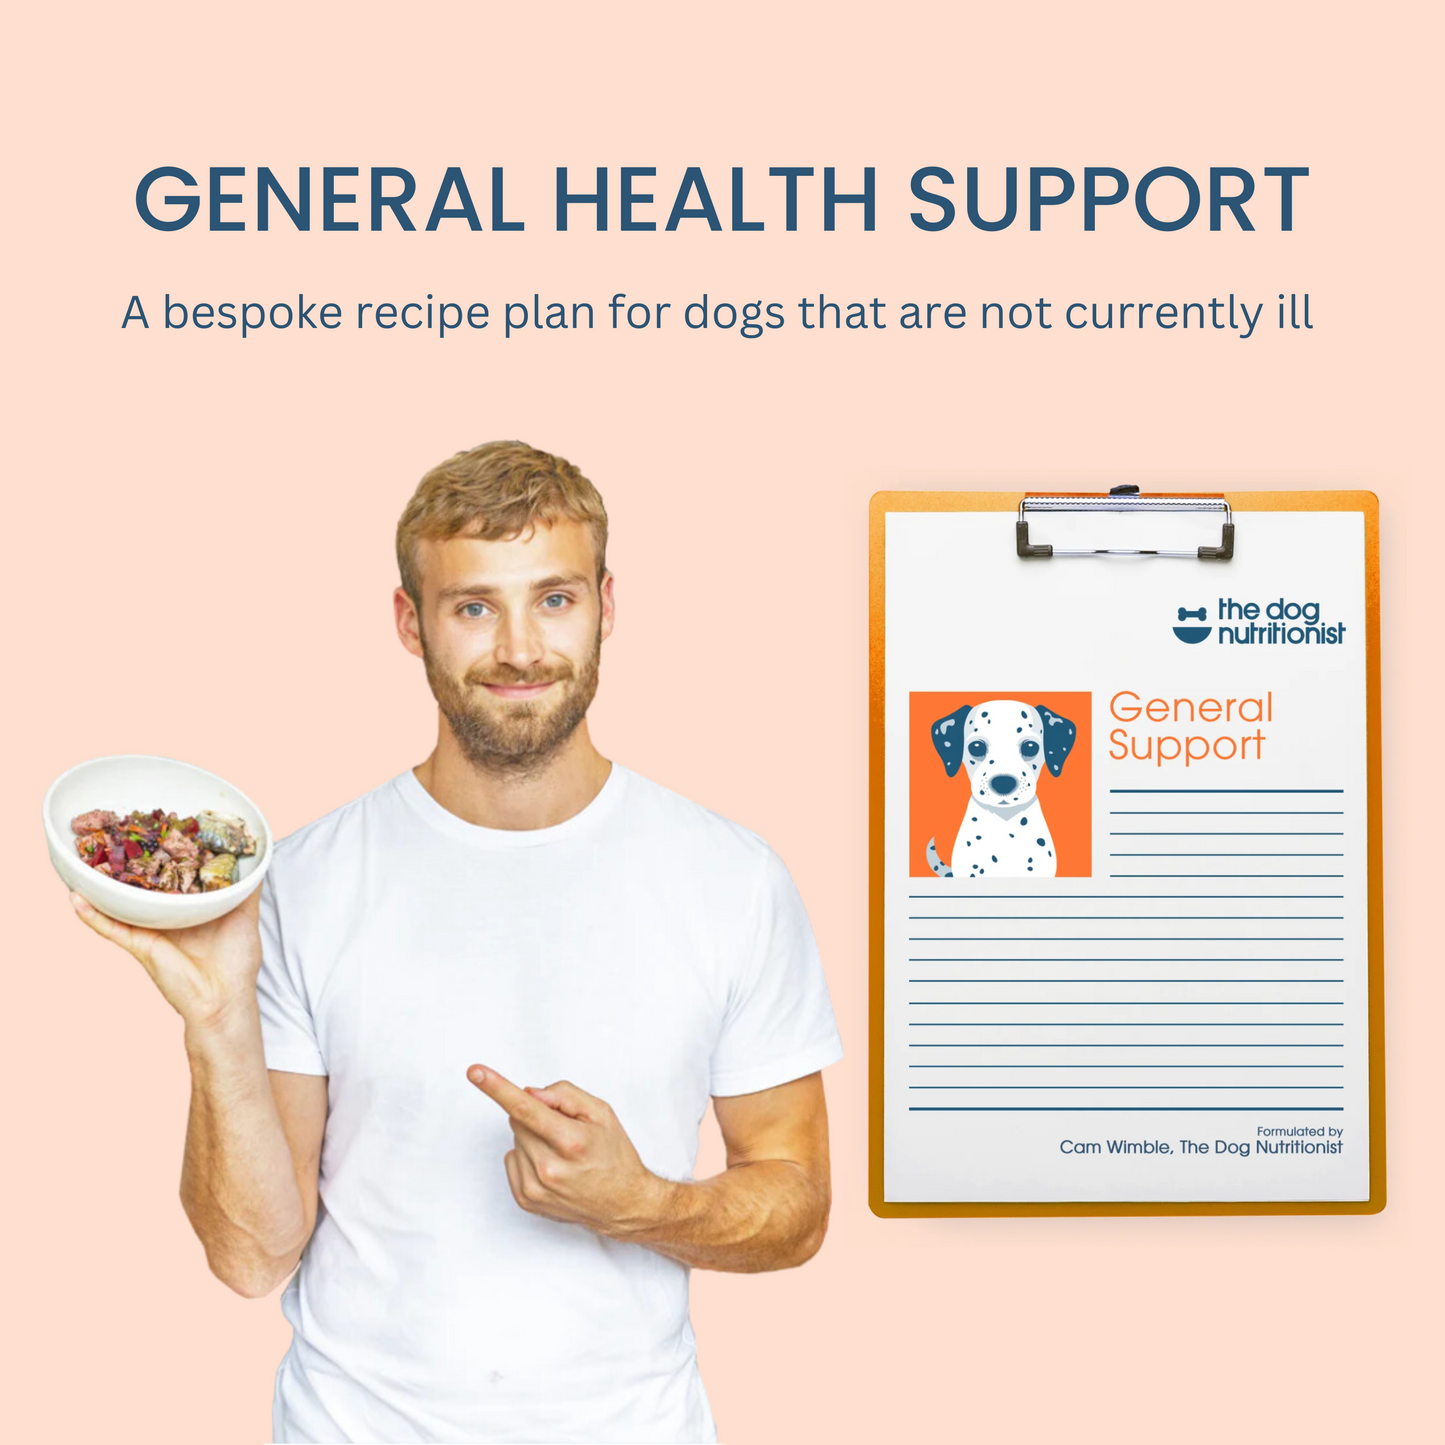 General Health Support